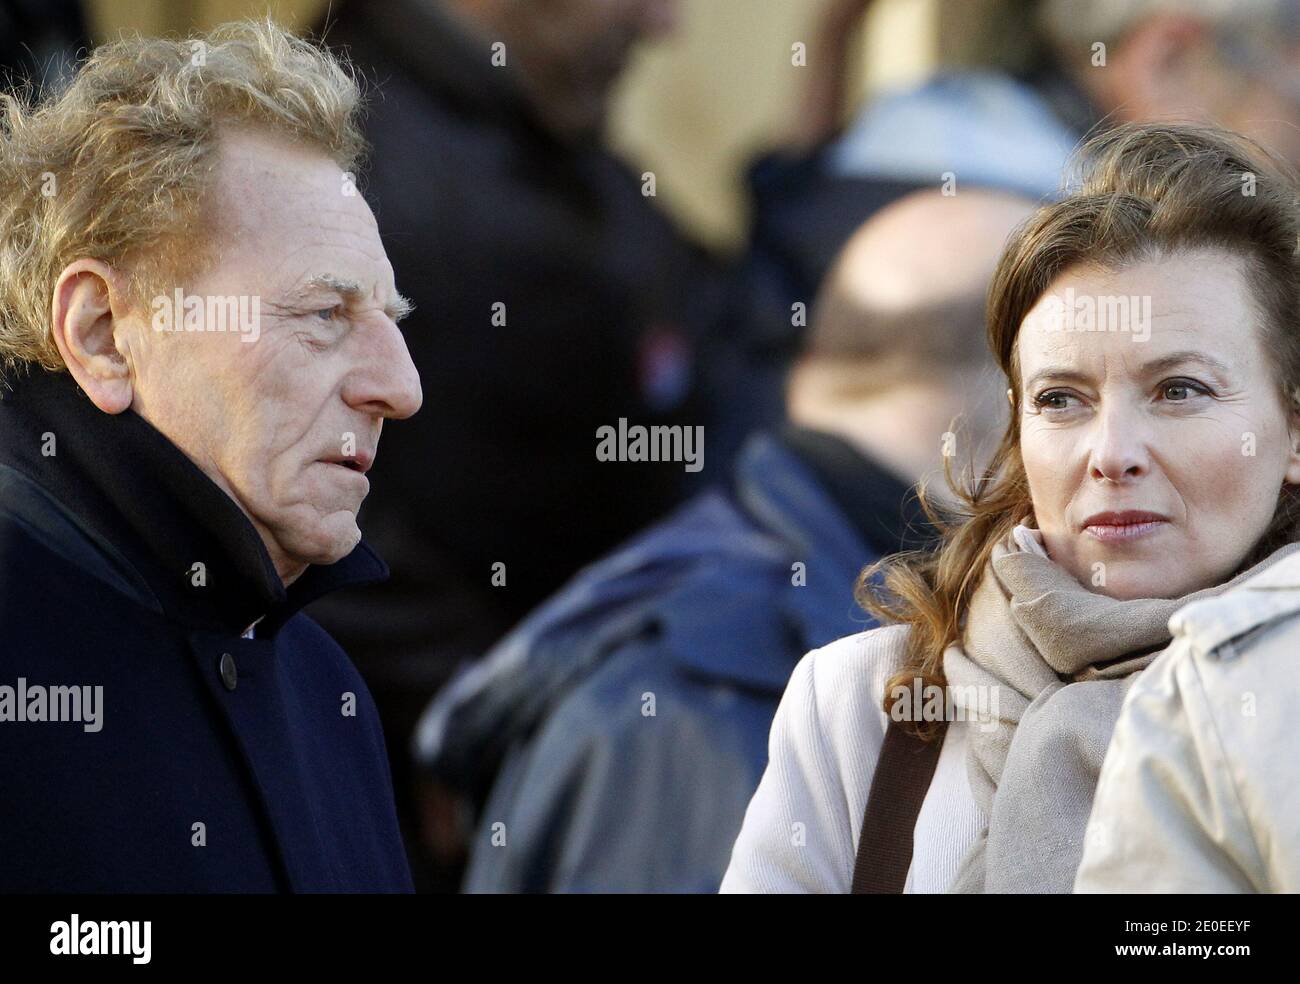 Robert Namias and Francois Hollande's partner Valerie Trierweiler attend France's Socialist Party (PS) candidate for the 2012 French presidential election Francois Hollande's campaign meeting in Cenon, near Bordeaux, southwestern France, on April 19, 2012. Photo by Patrick Bernard/ABACAPRESS.COM Stock Photo